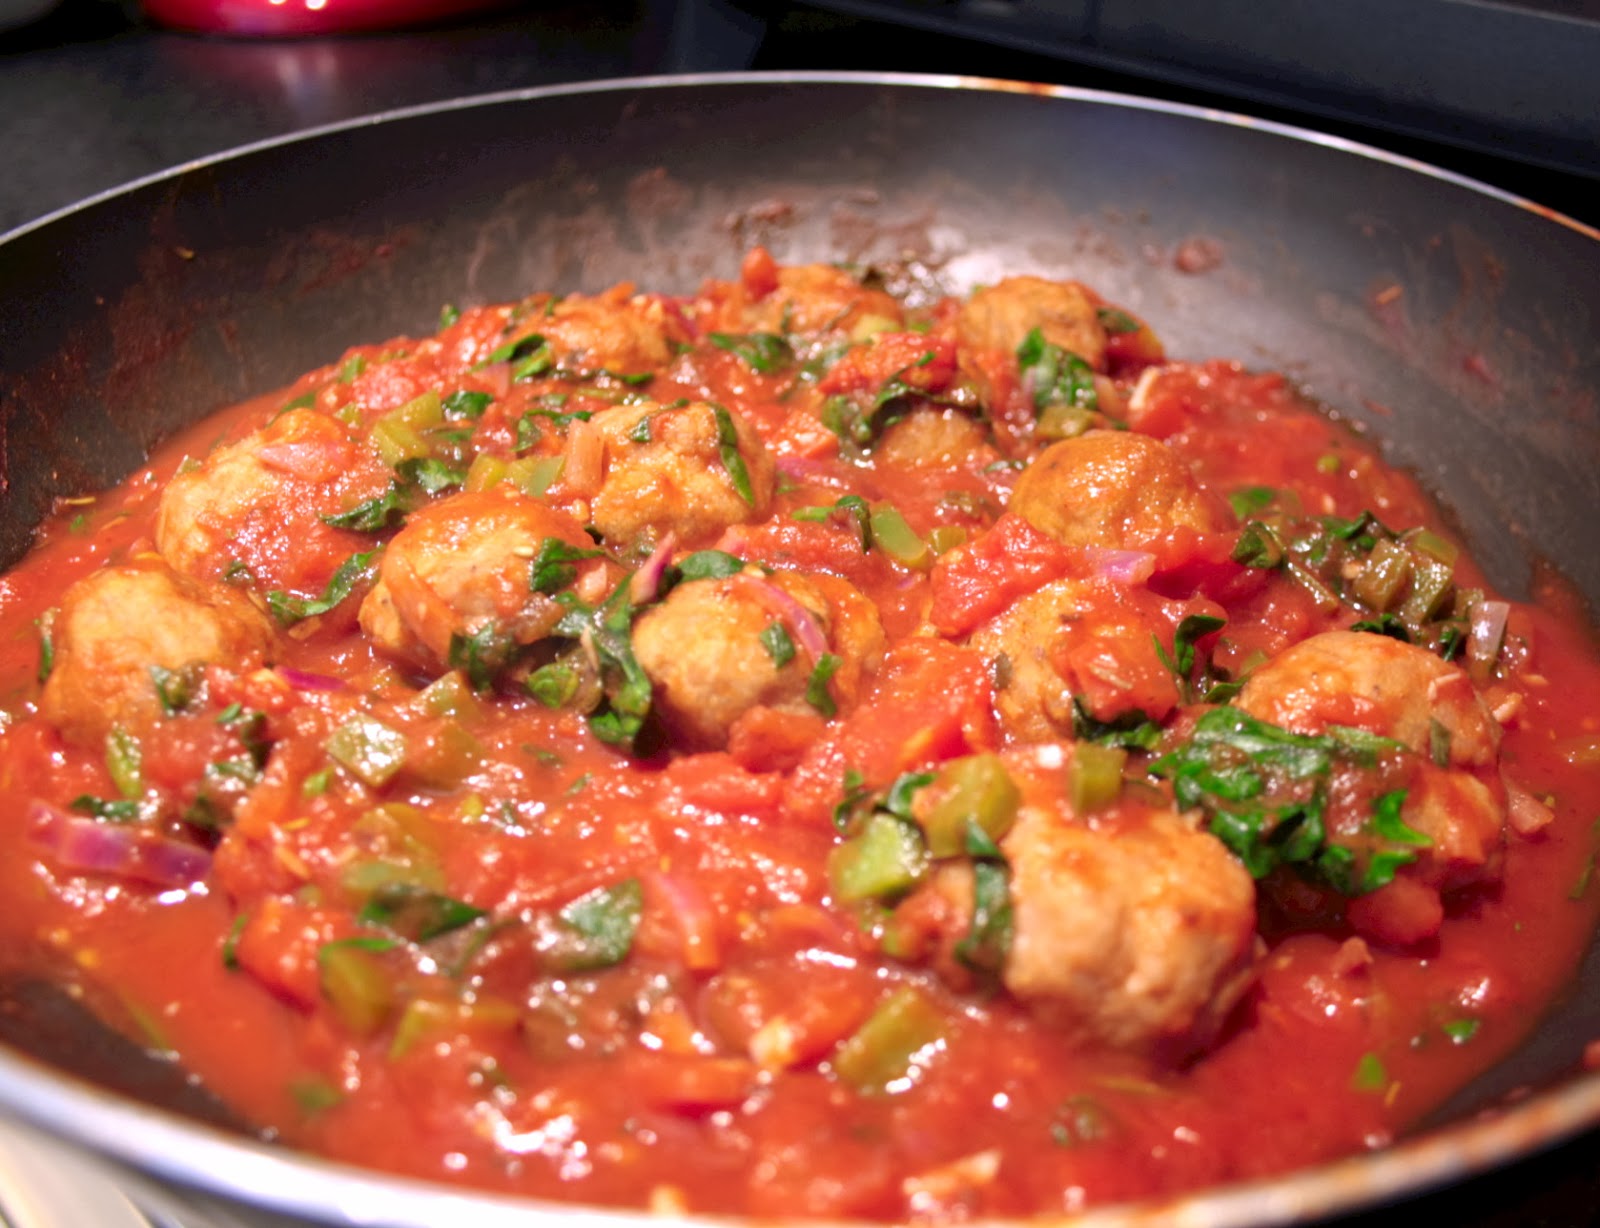 Turkey meatballs with a green pepper and spinach tomato sauce.  A healthier alternative to beef balls